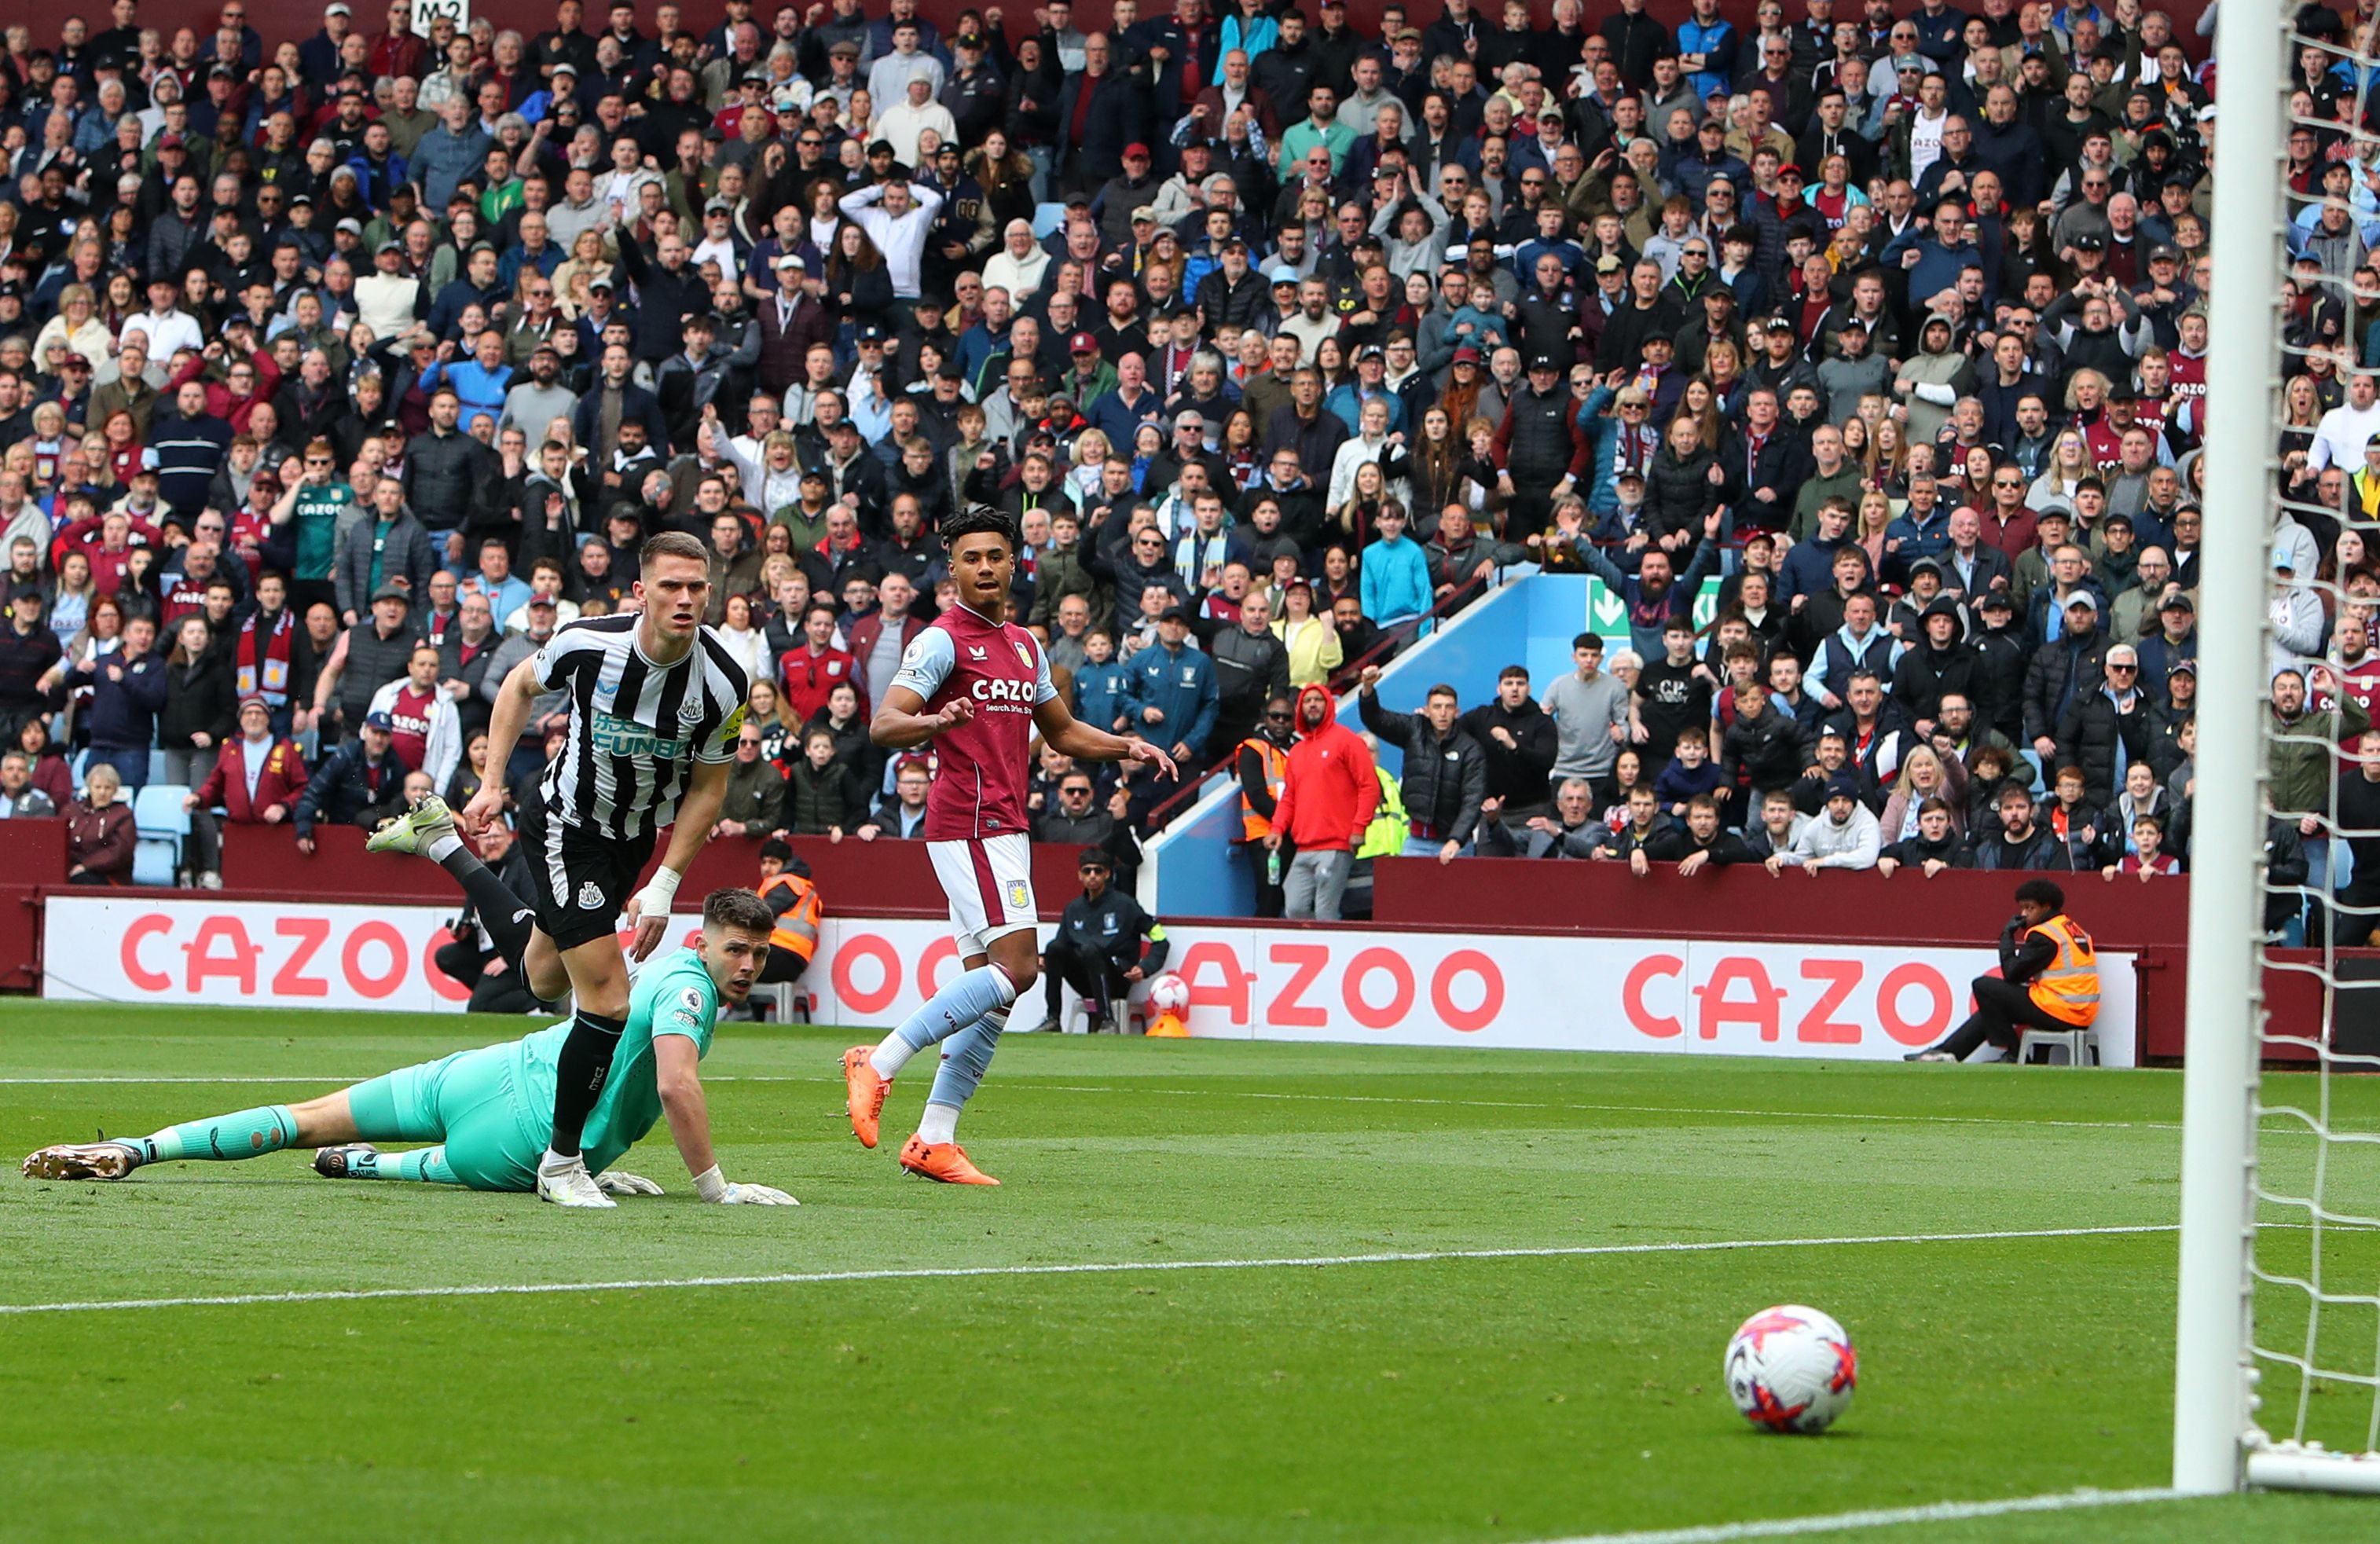 , Aston Villa 3 Newcastle 0: Toon suffer heaviest loss of season as Watkins puts on another show in front of Southgate